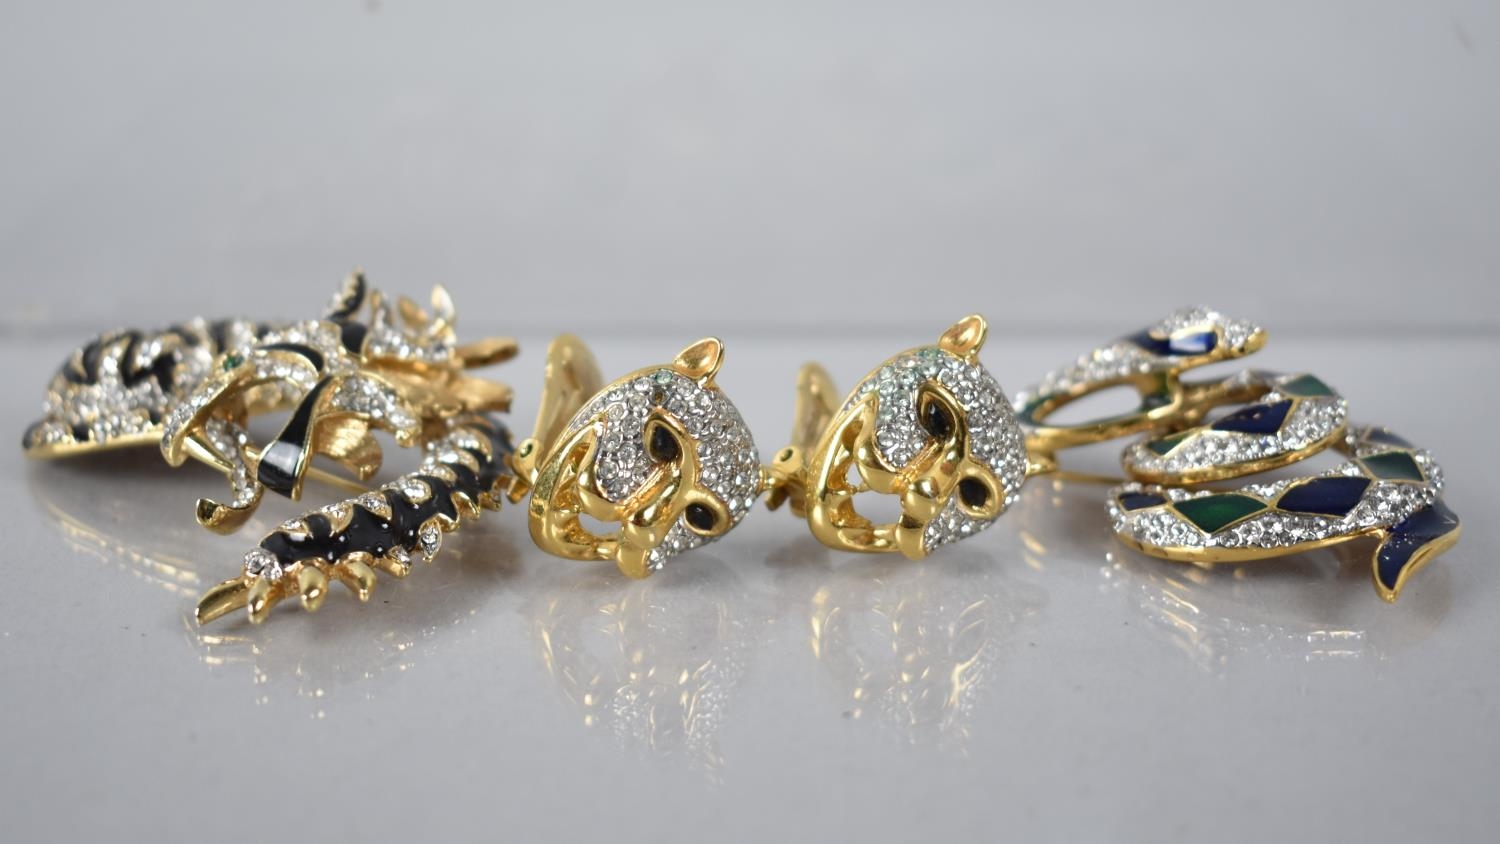 Two Vintage Jewelled Gold Tone Brooches by A&S, Coiled Serpent and Tiger together with a Pair of